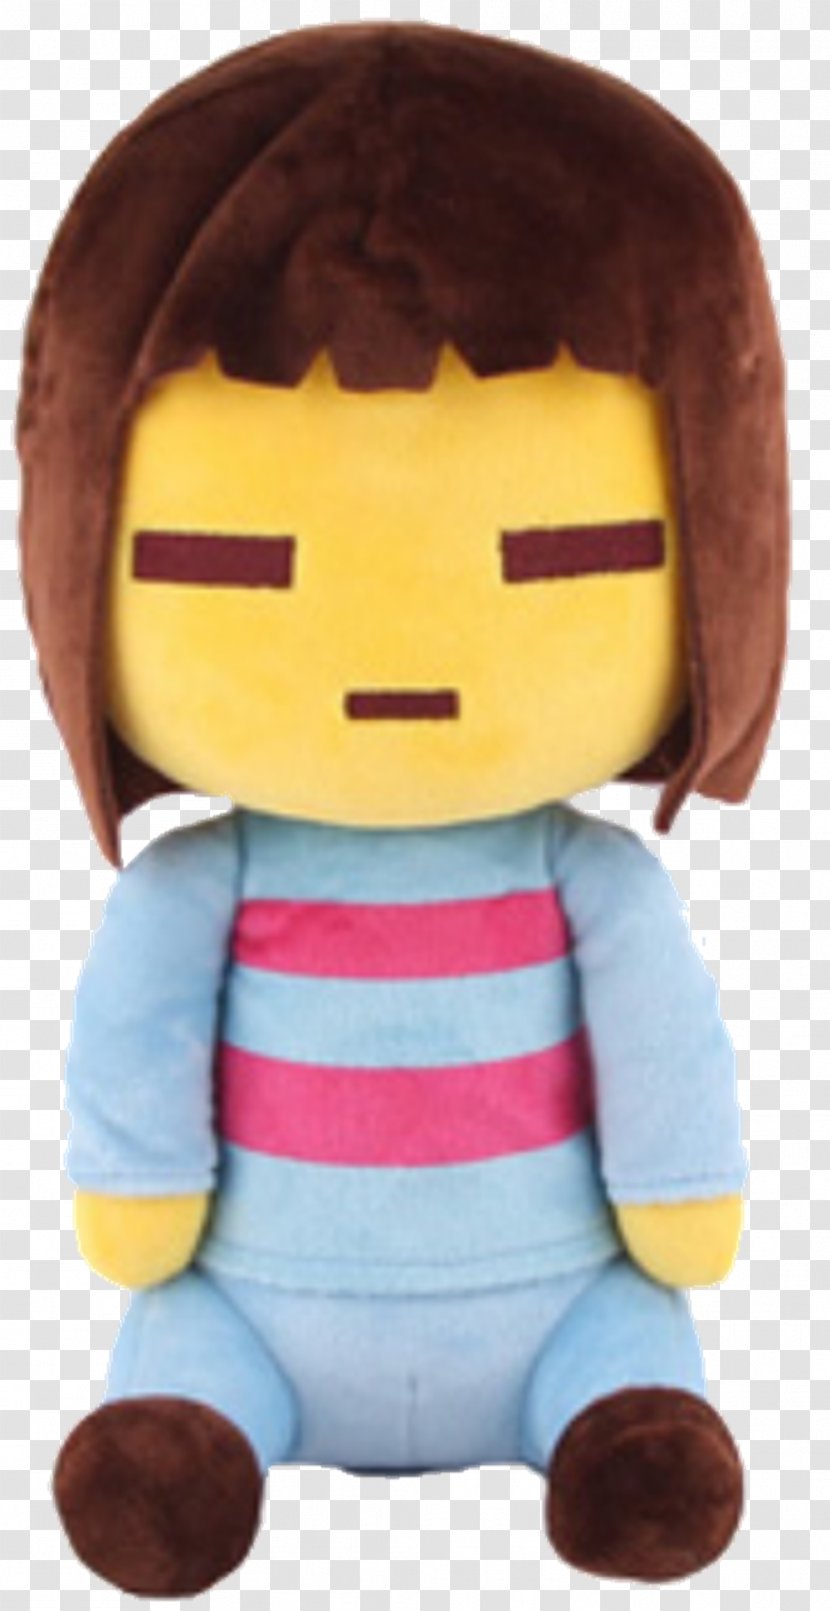 Undertale Stuffed Animals & Cuddly Toys Plush Doll - Toriel - Toy Transparent PNG